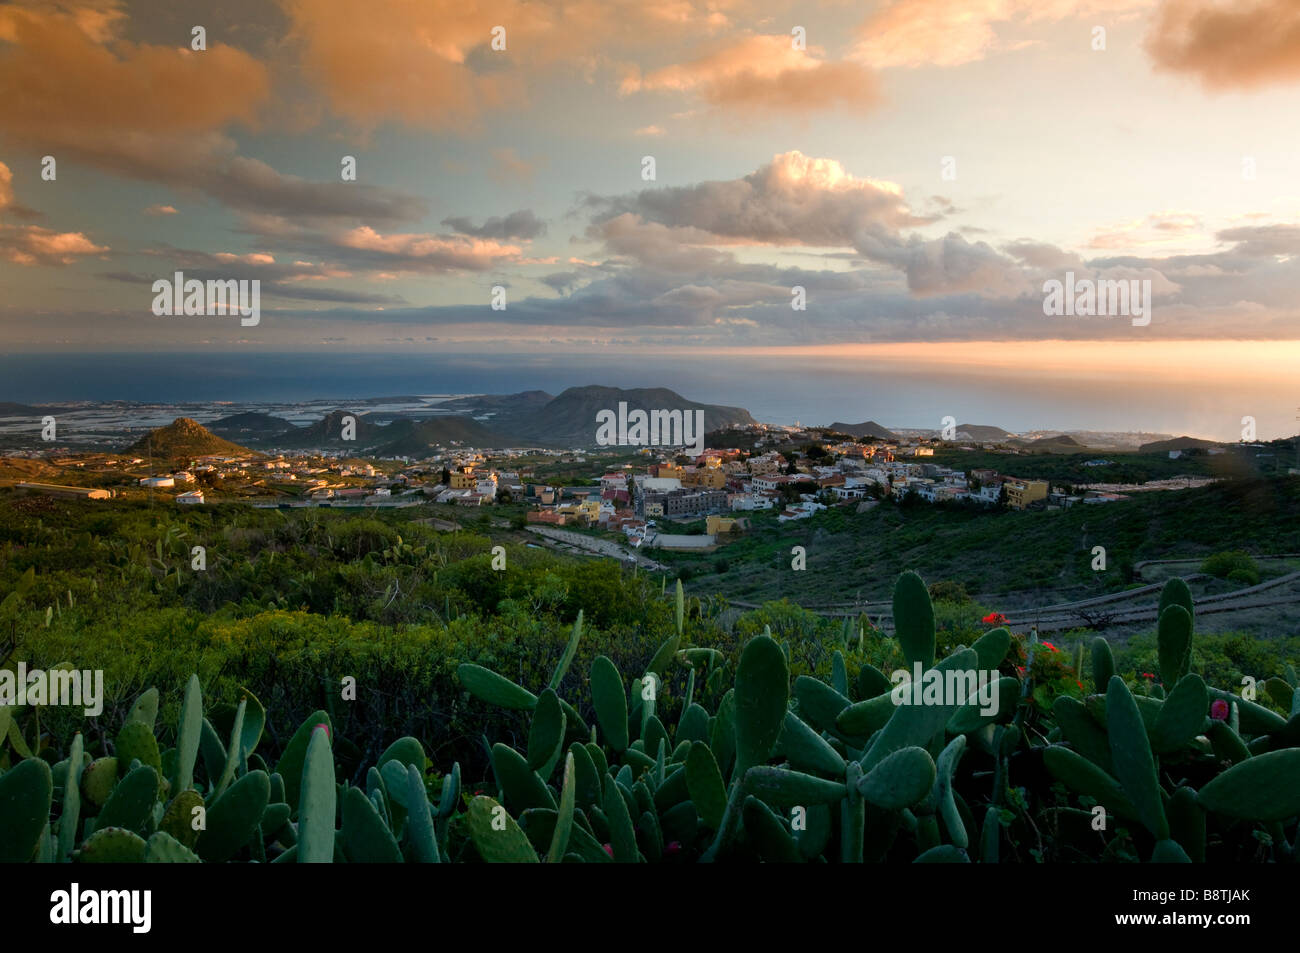 Sunset over the mountain village of Arona with typical cacti in foreground and resort of Los Cristianos behind, Tenerife Spain Stock Photo